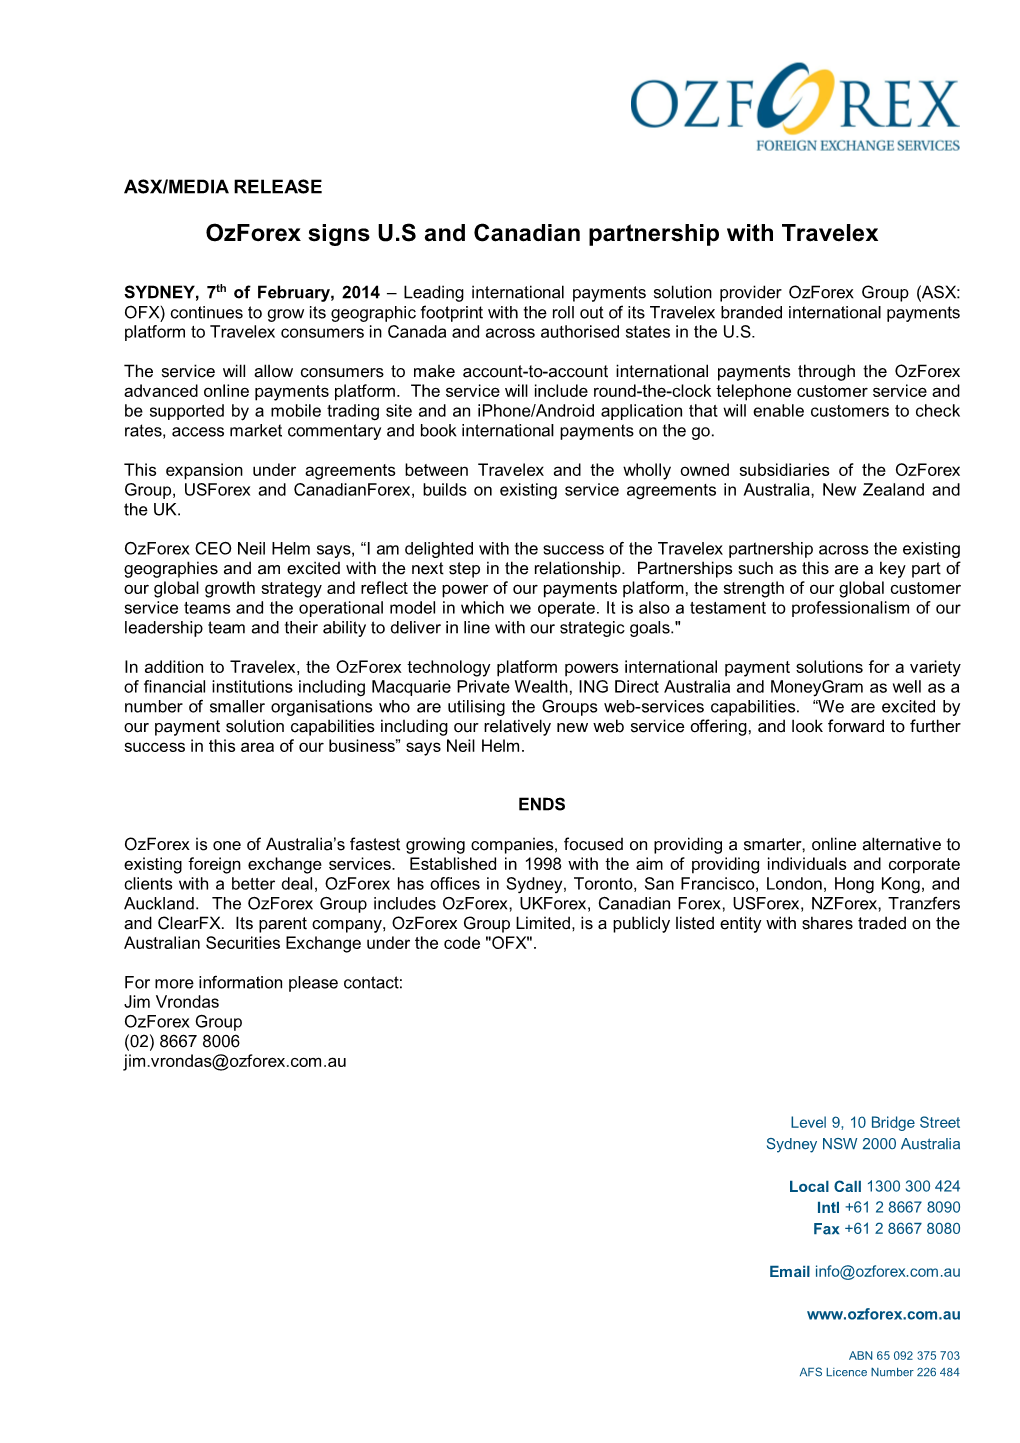 Ozforex Signs U.S and Canadian Partnership with Travelex